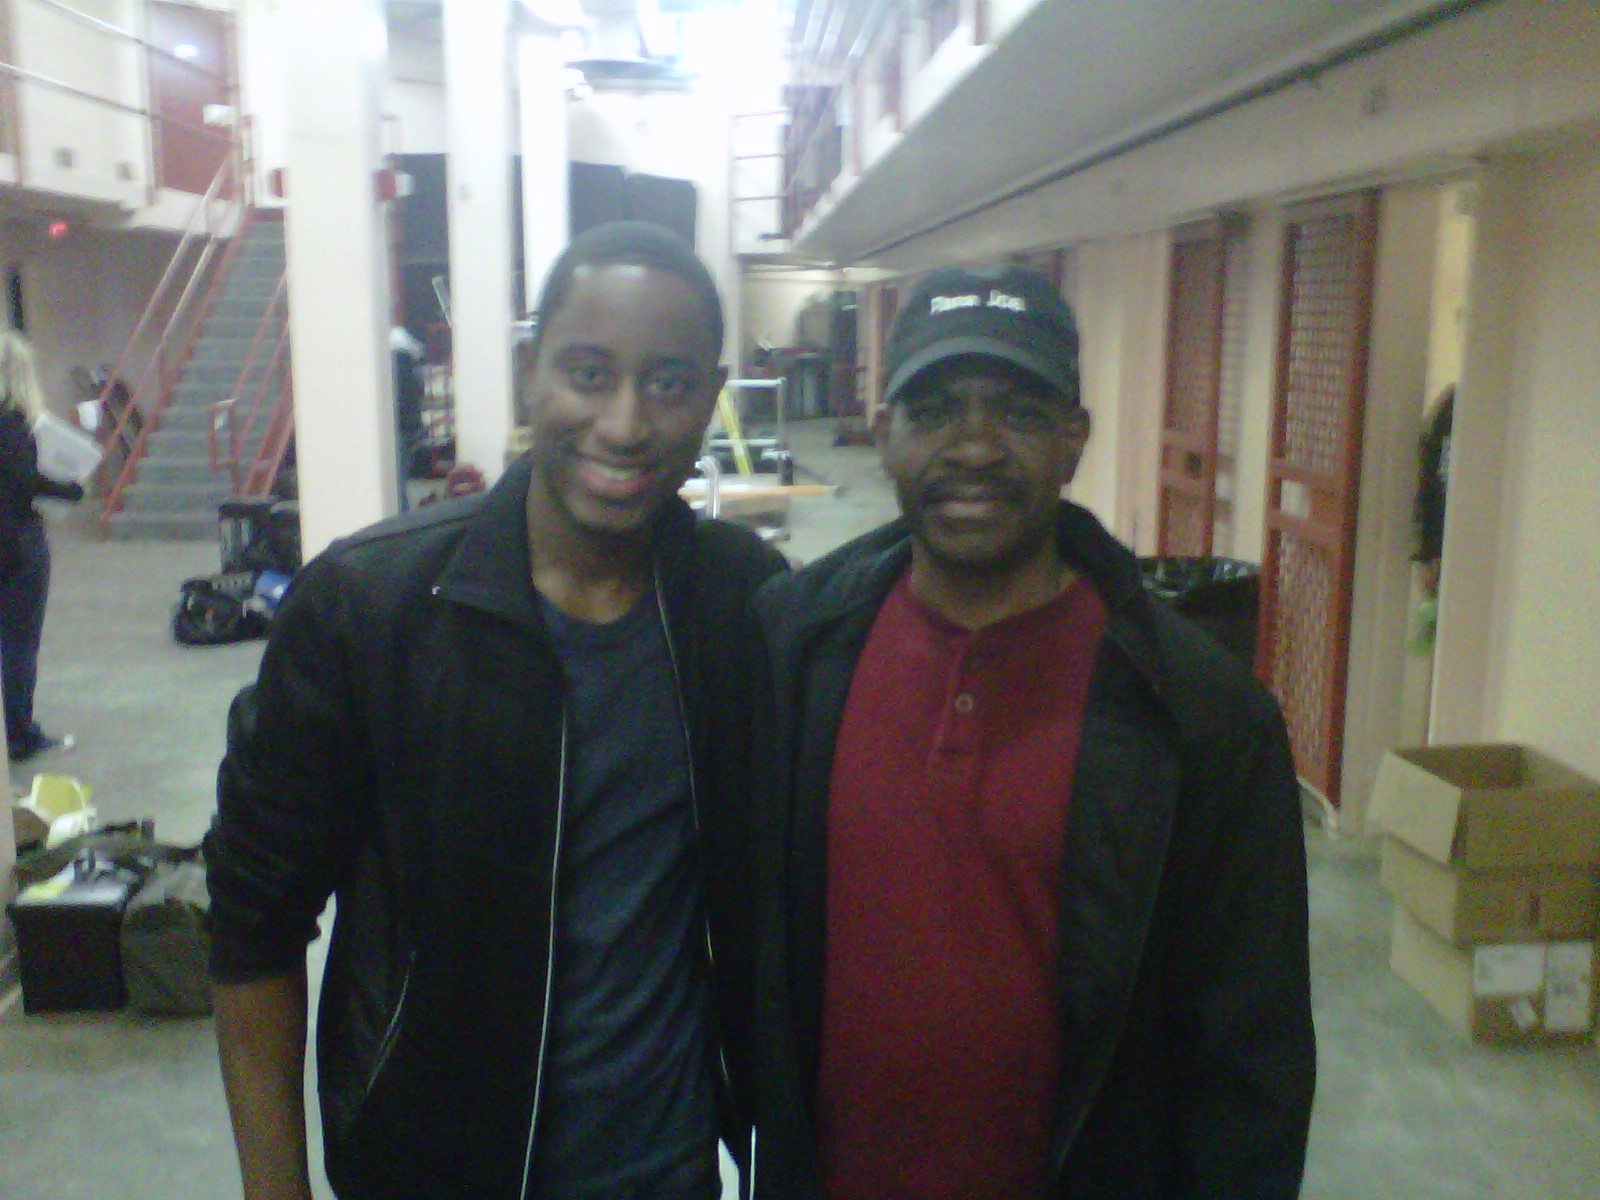 Montrel Miller and Papa Joe Bradford on the set of Unconditional. The film is based on real events from Joe Bradford's life (who is portrayed by Michael Ealy)